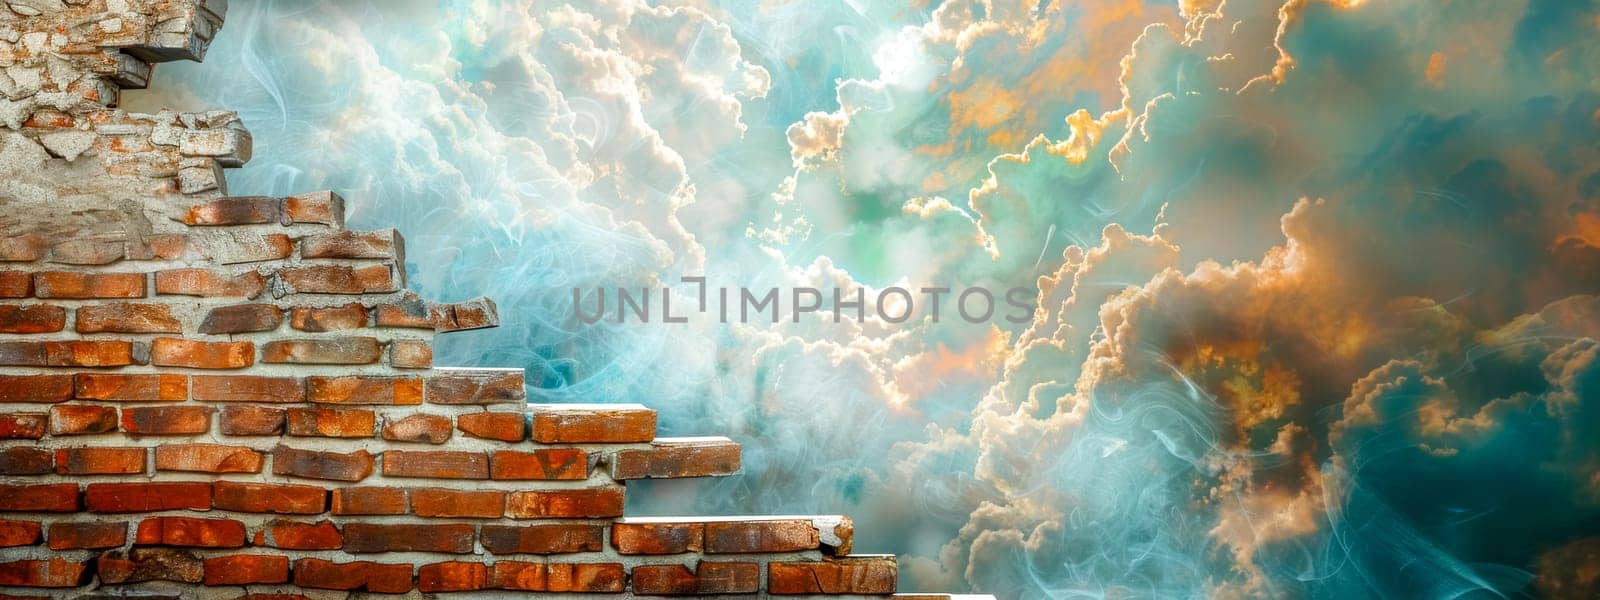 Ascend to the heavens: dreamy staircase against a sky by Edophoto